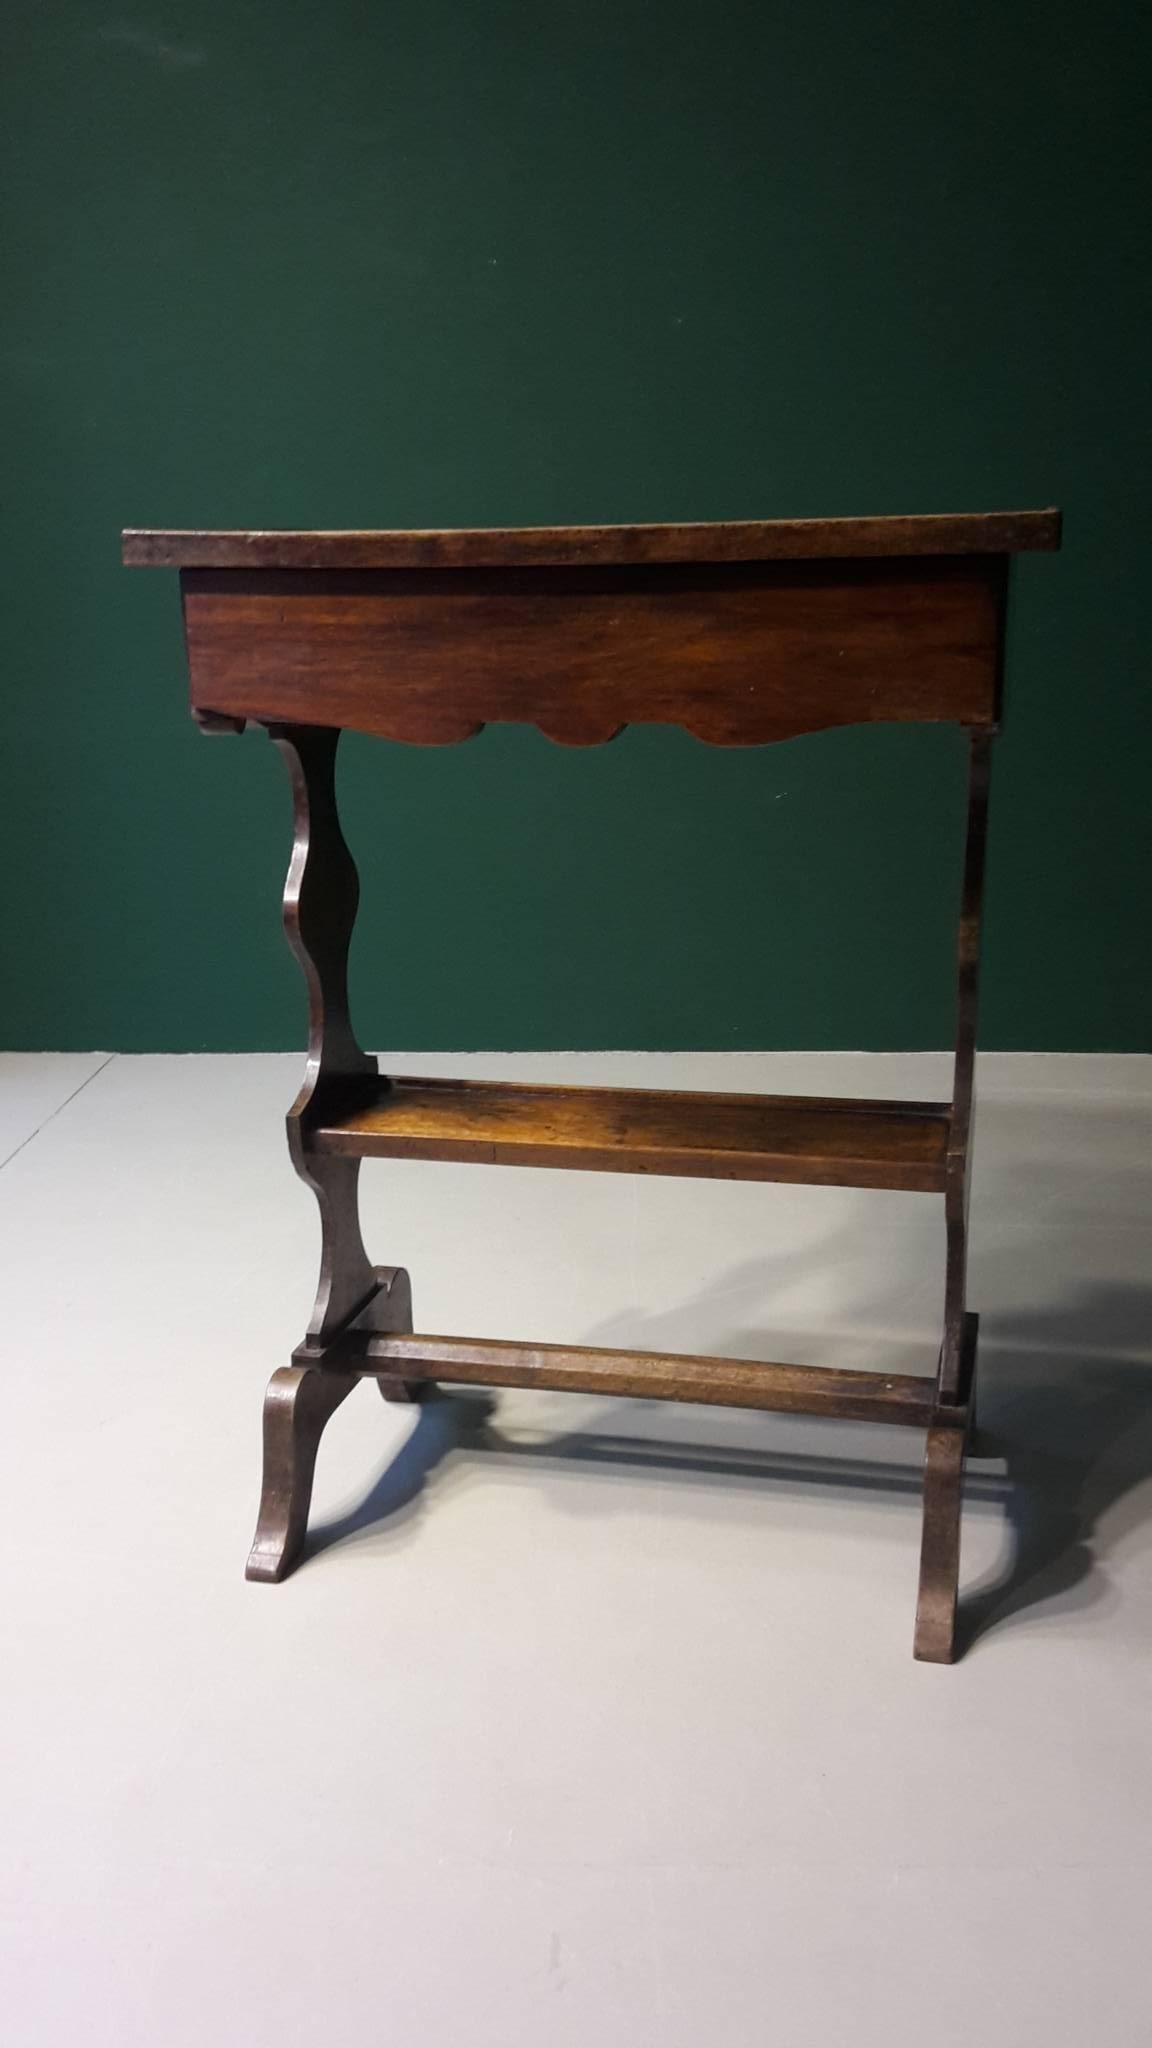 Veneer Late 19th Century French Side Table Made of Walnut